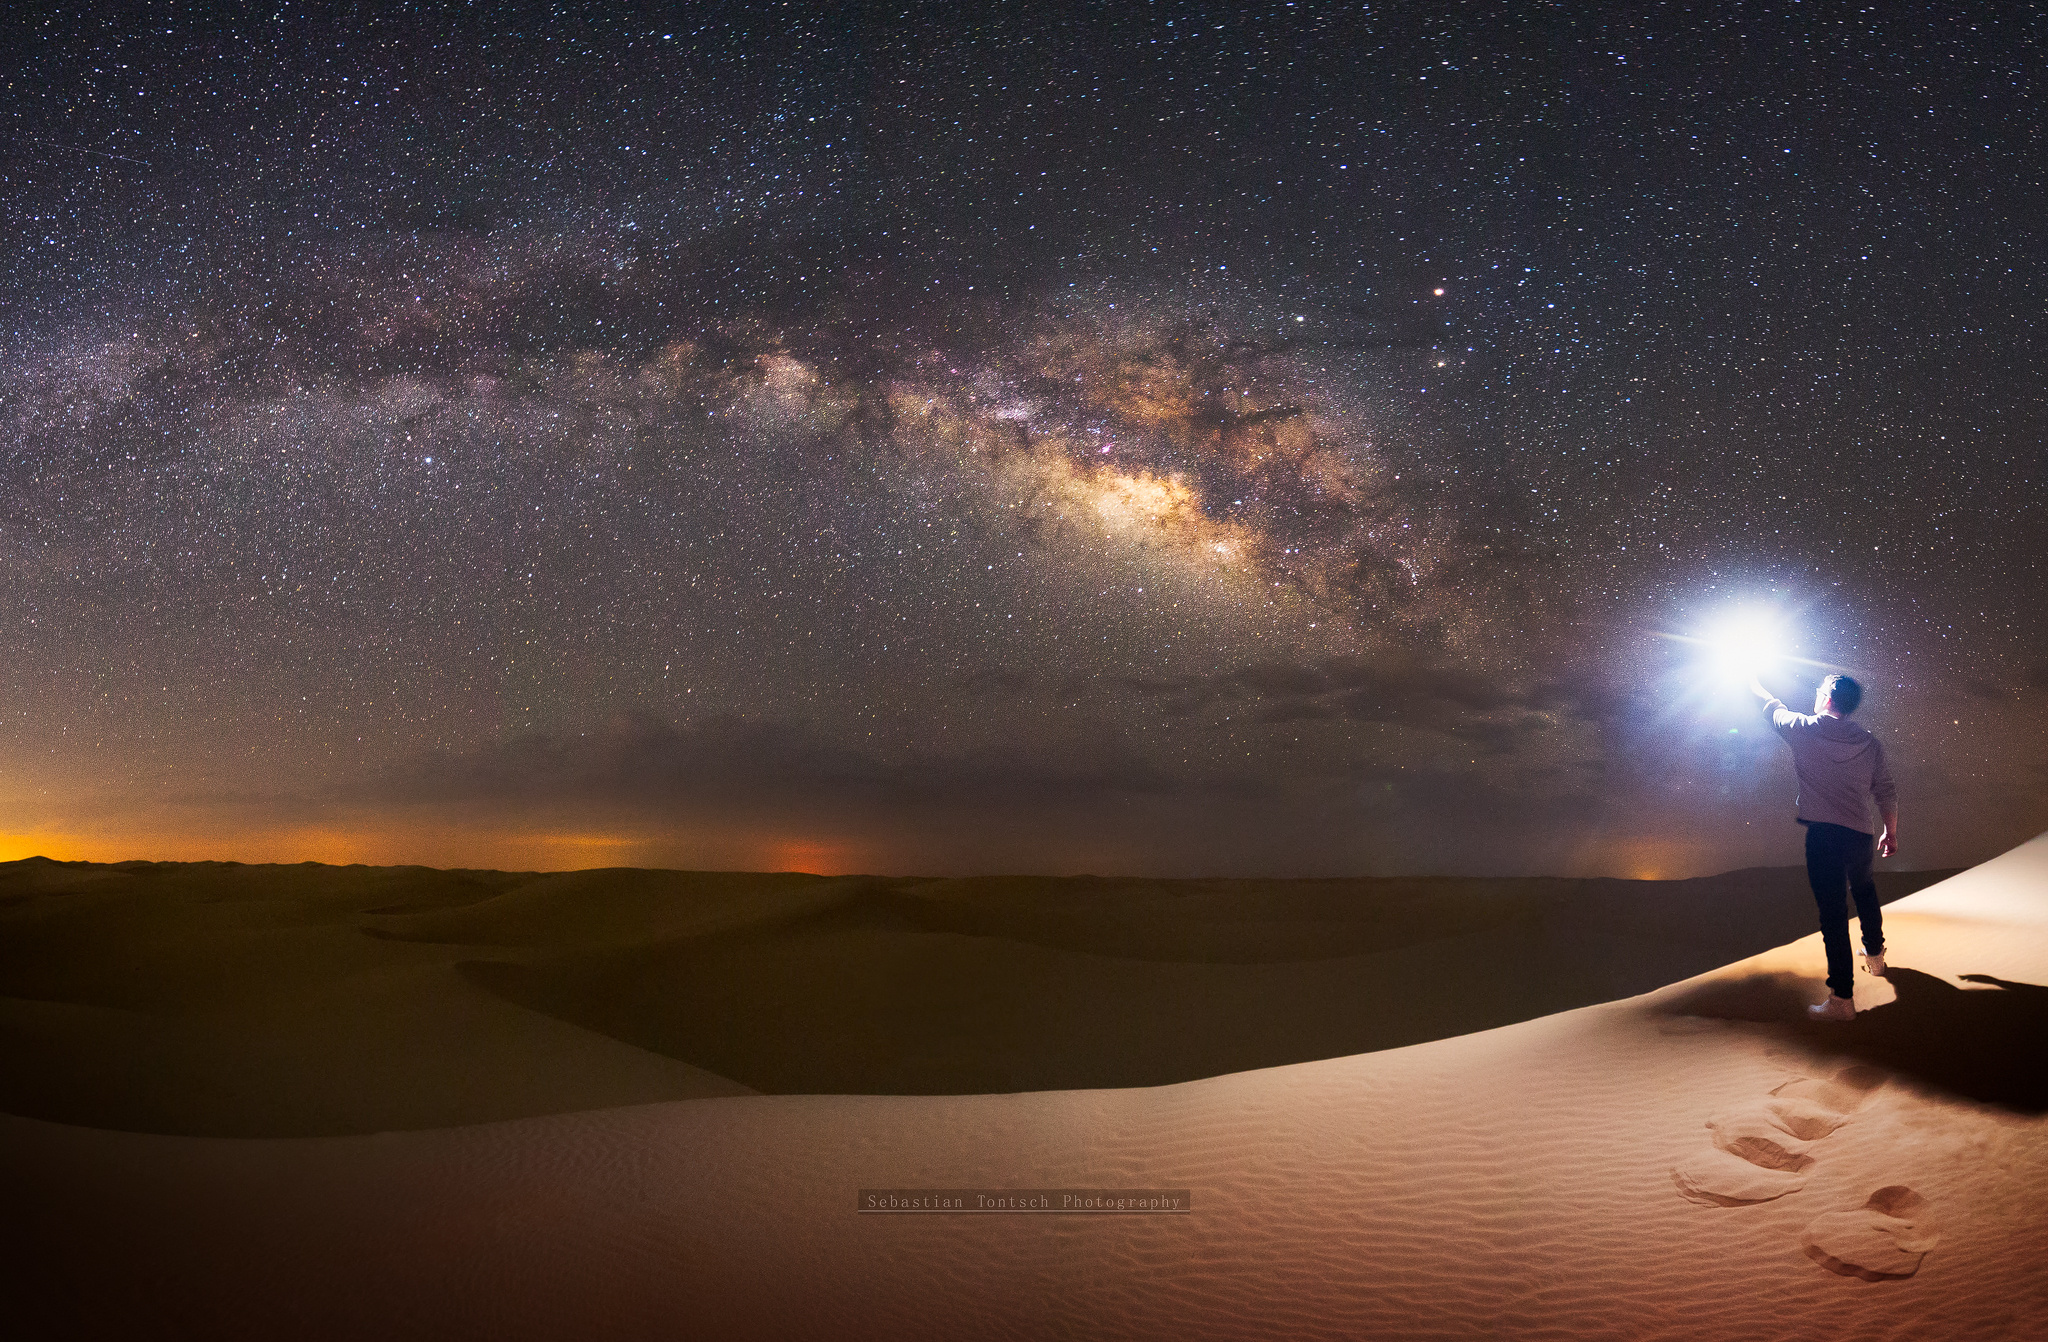 10 Tips For Taking Milky Way Photos in the Desert